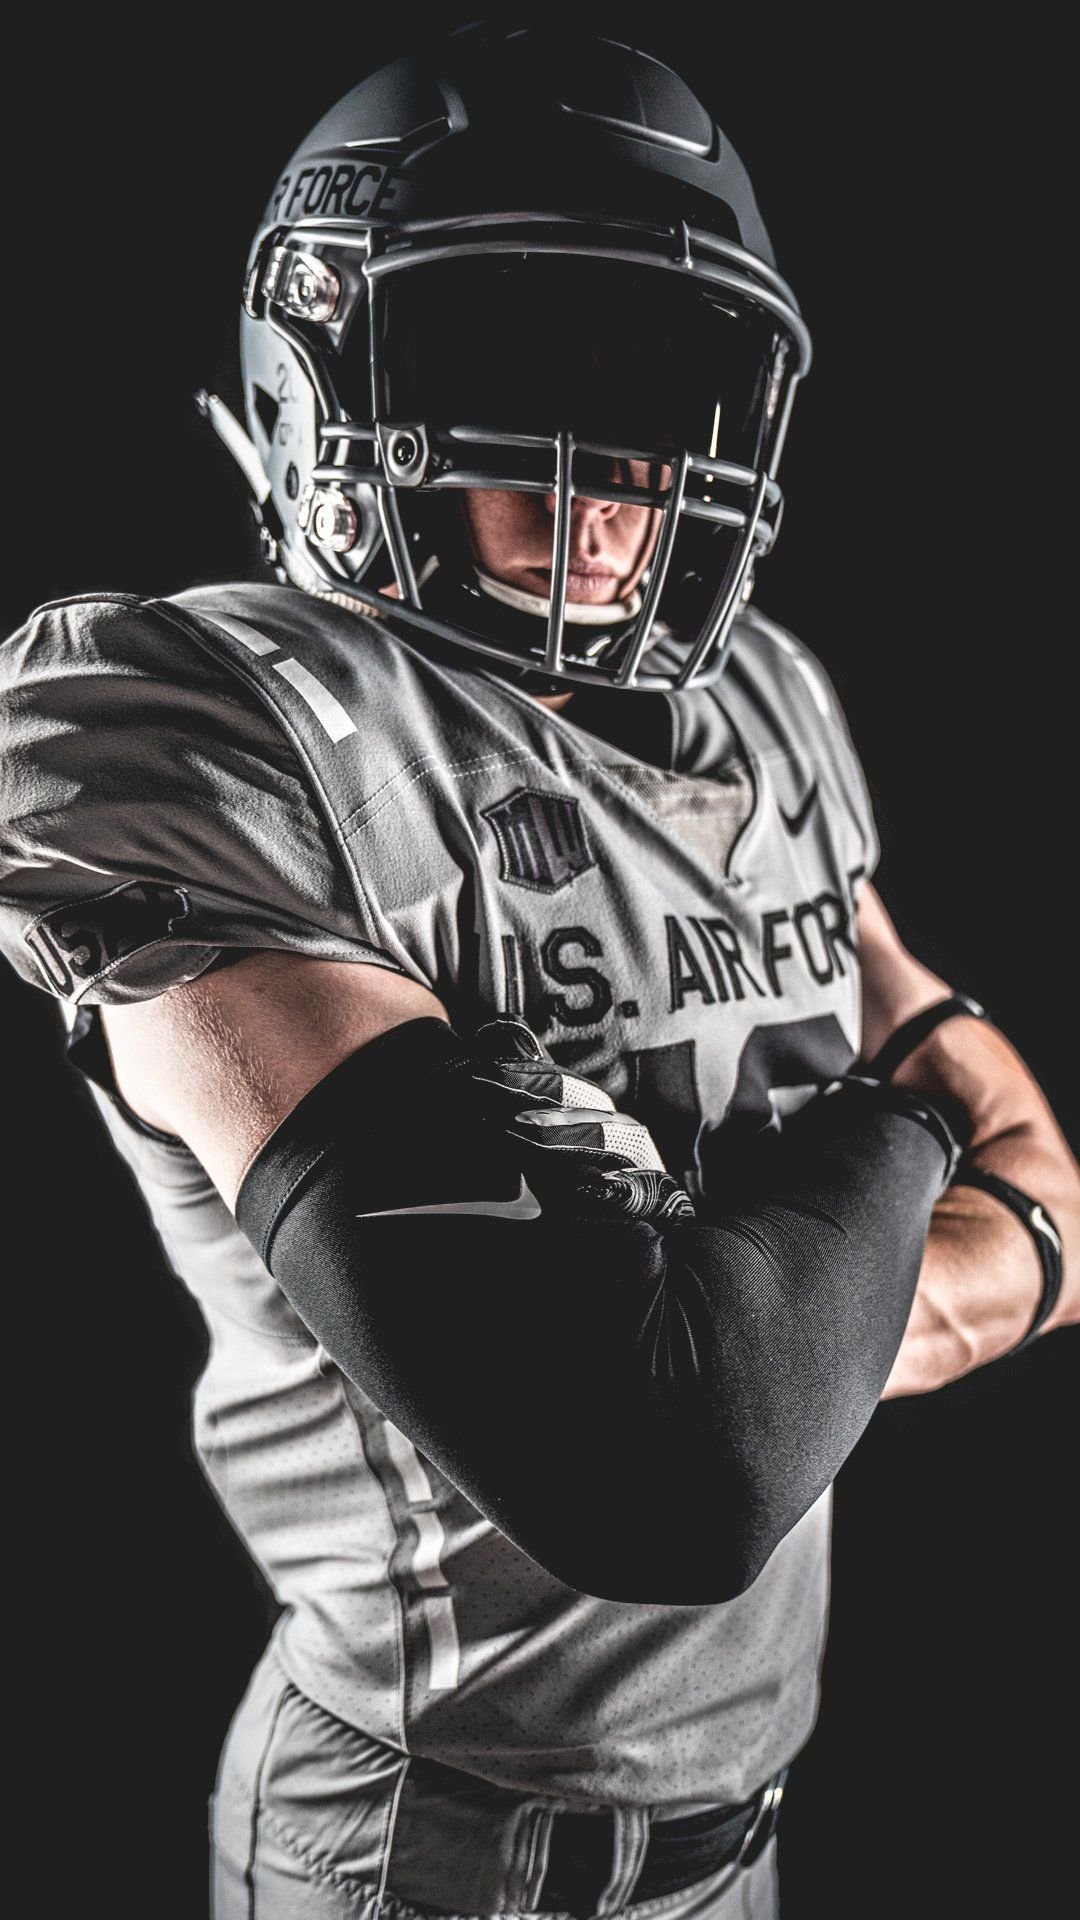 Air Force notes | Football uniforms 